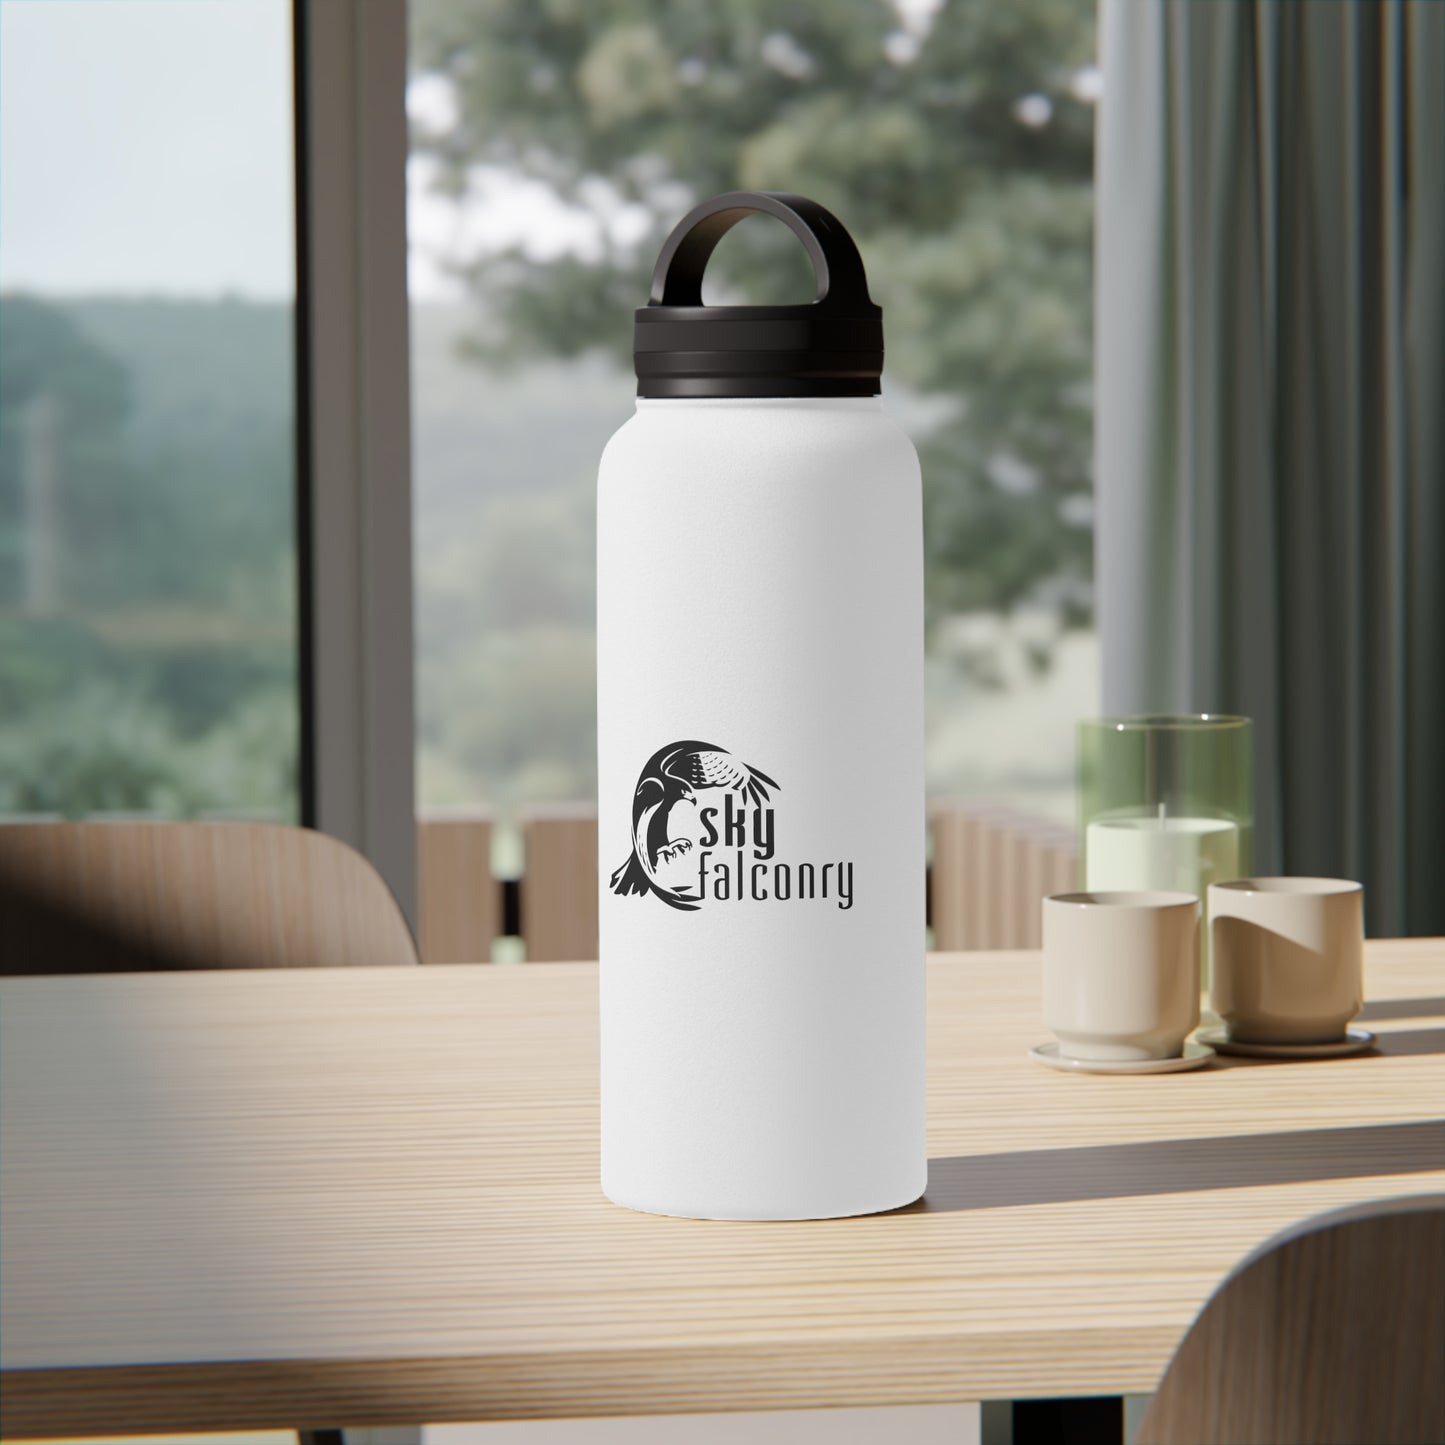 Sky Falconry Stainless Steel Water Bottle, Handle Lid